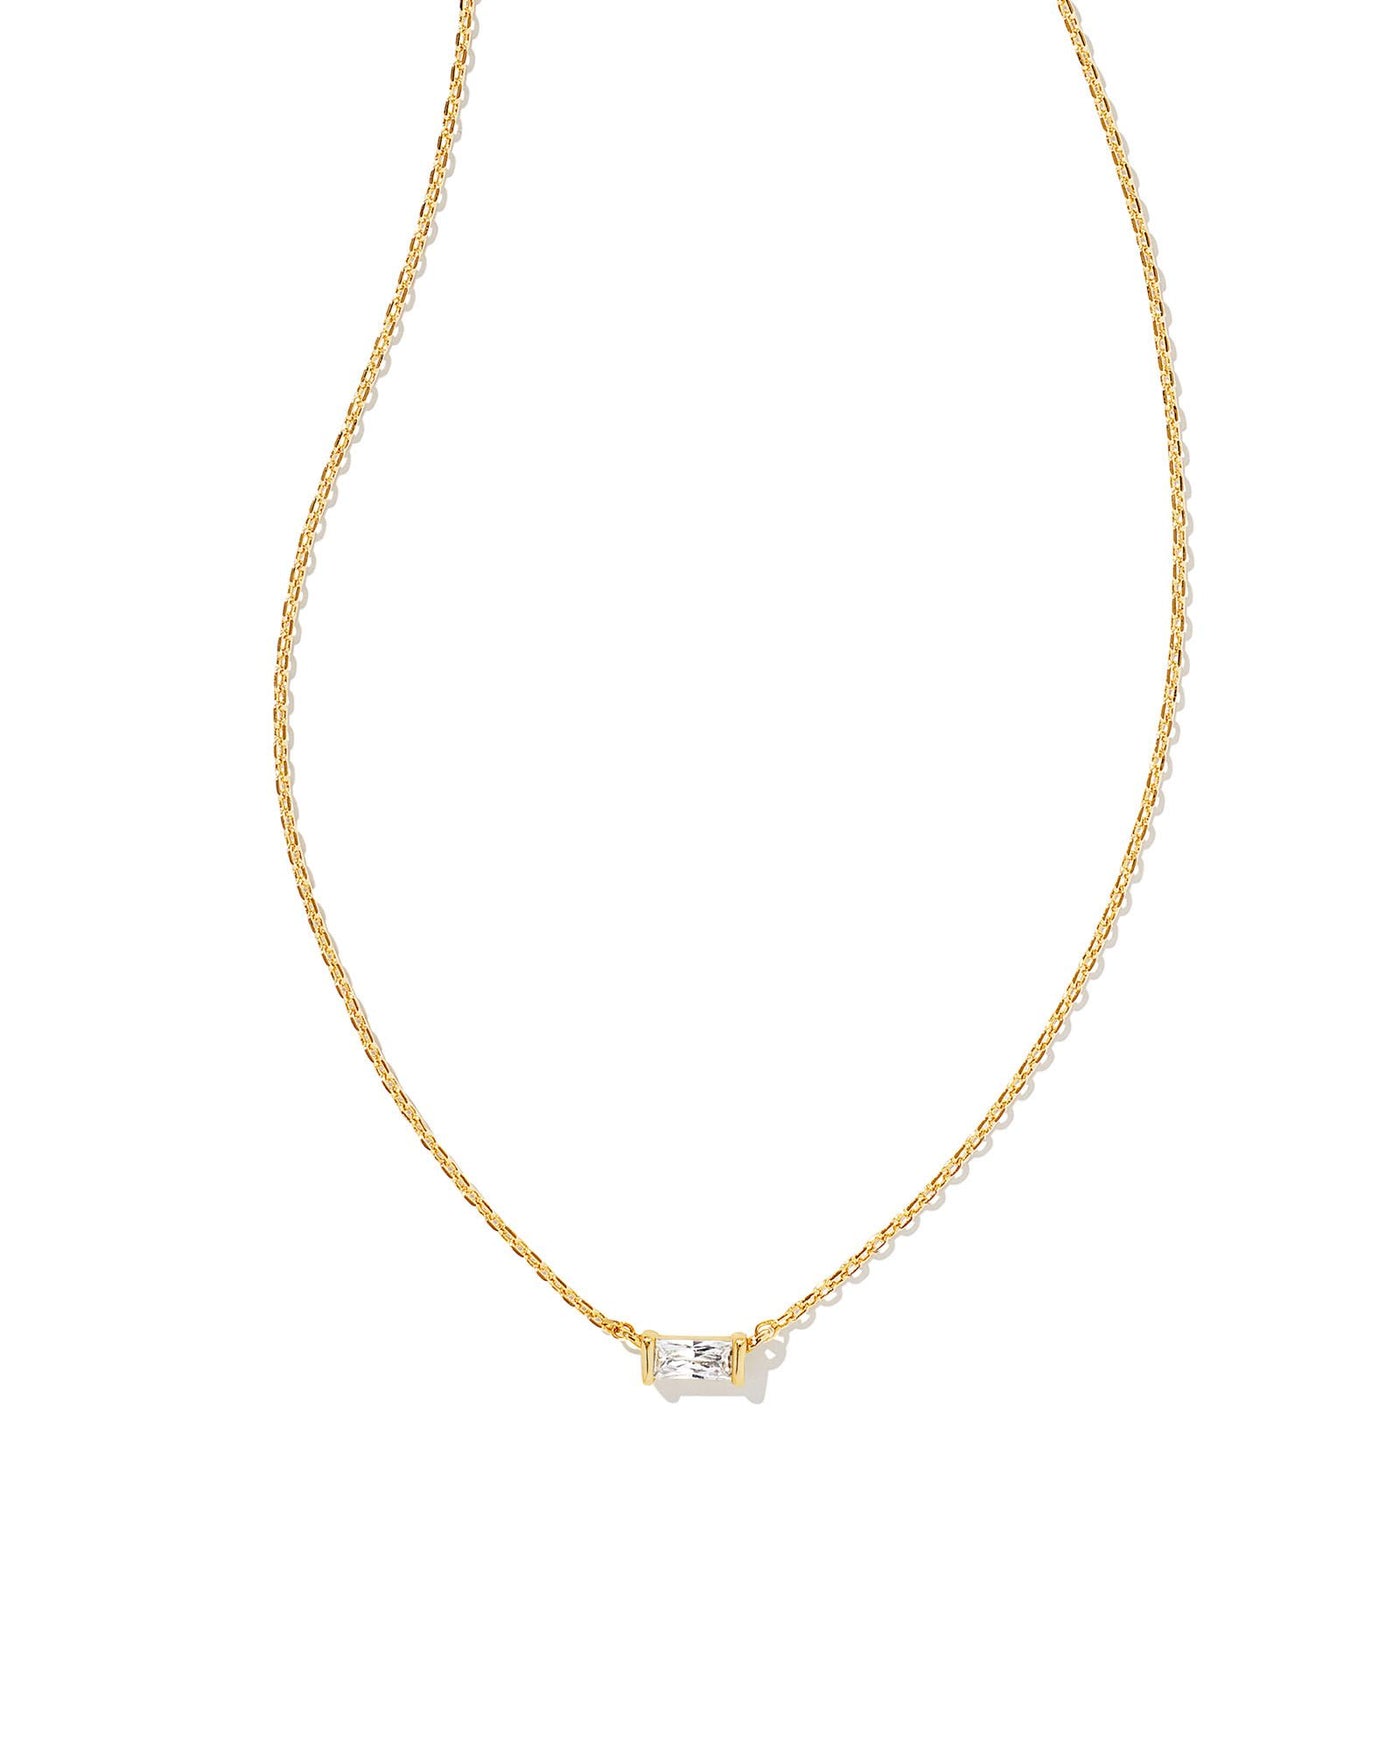 Juliette Pendant Necklace Gold White Crystal on white background, front view.